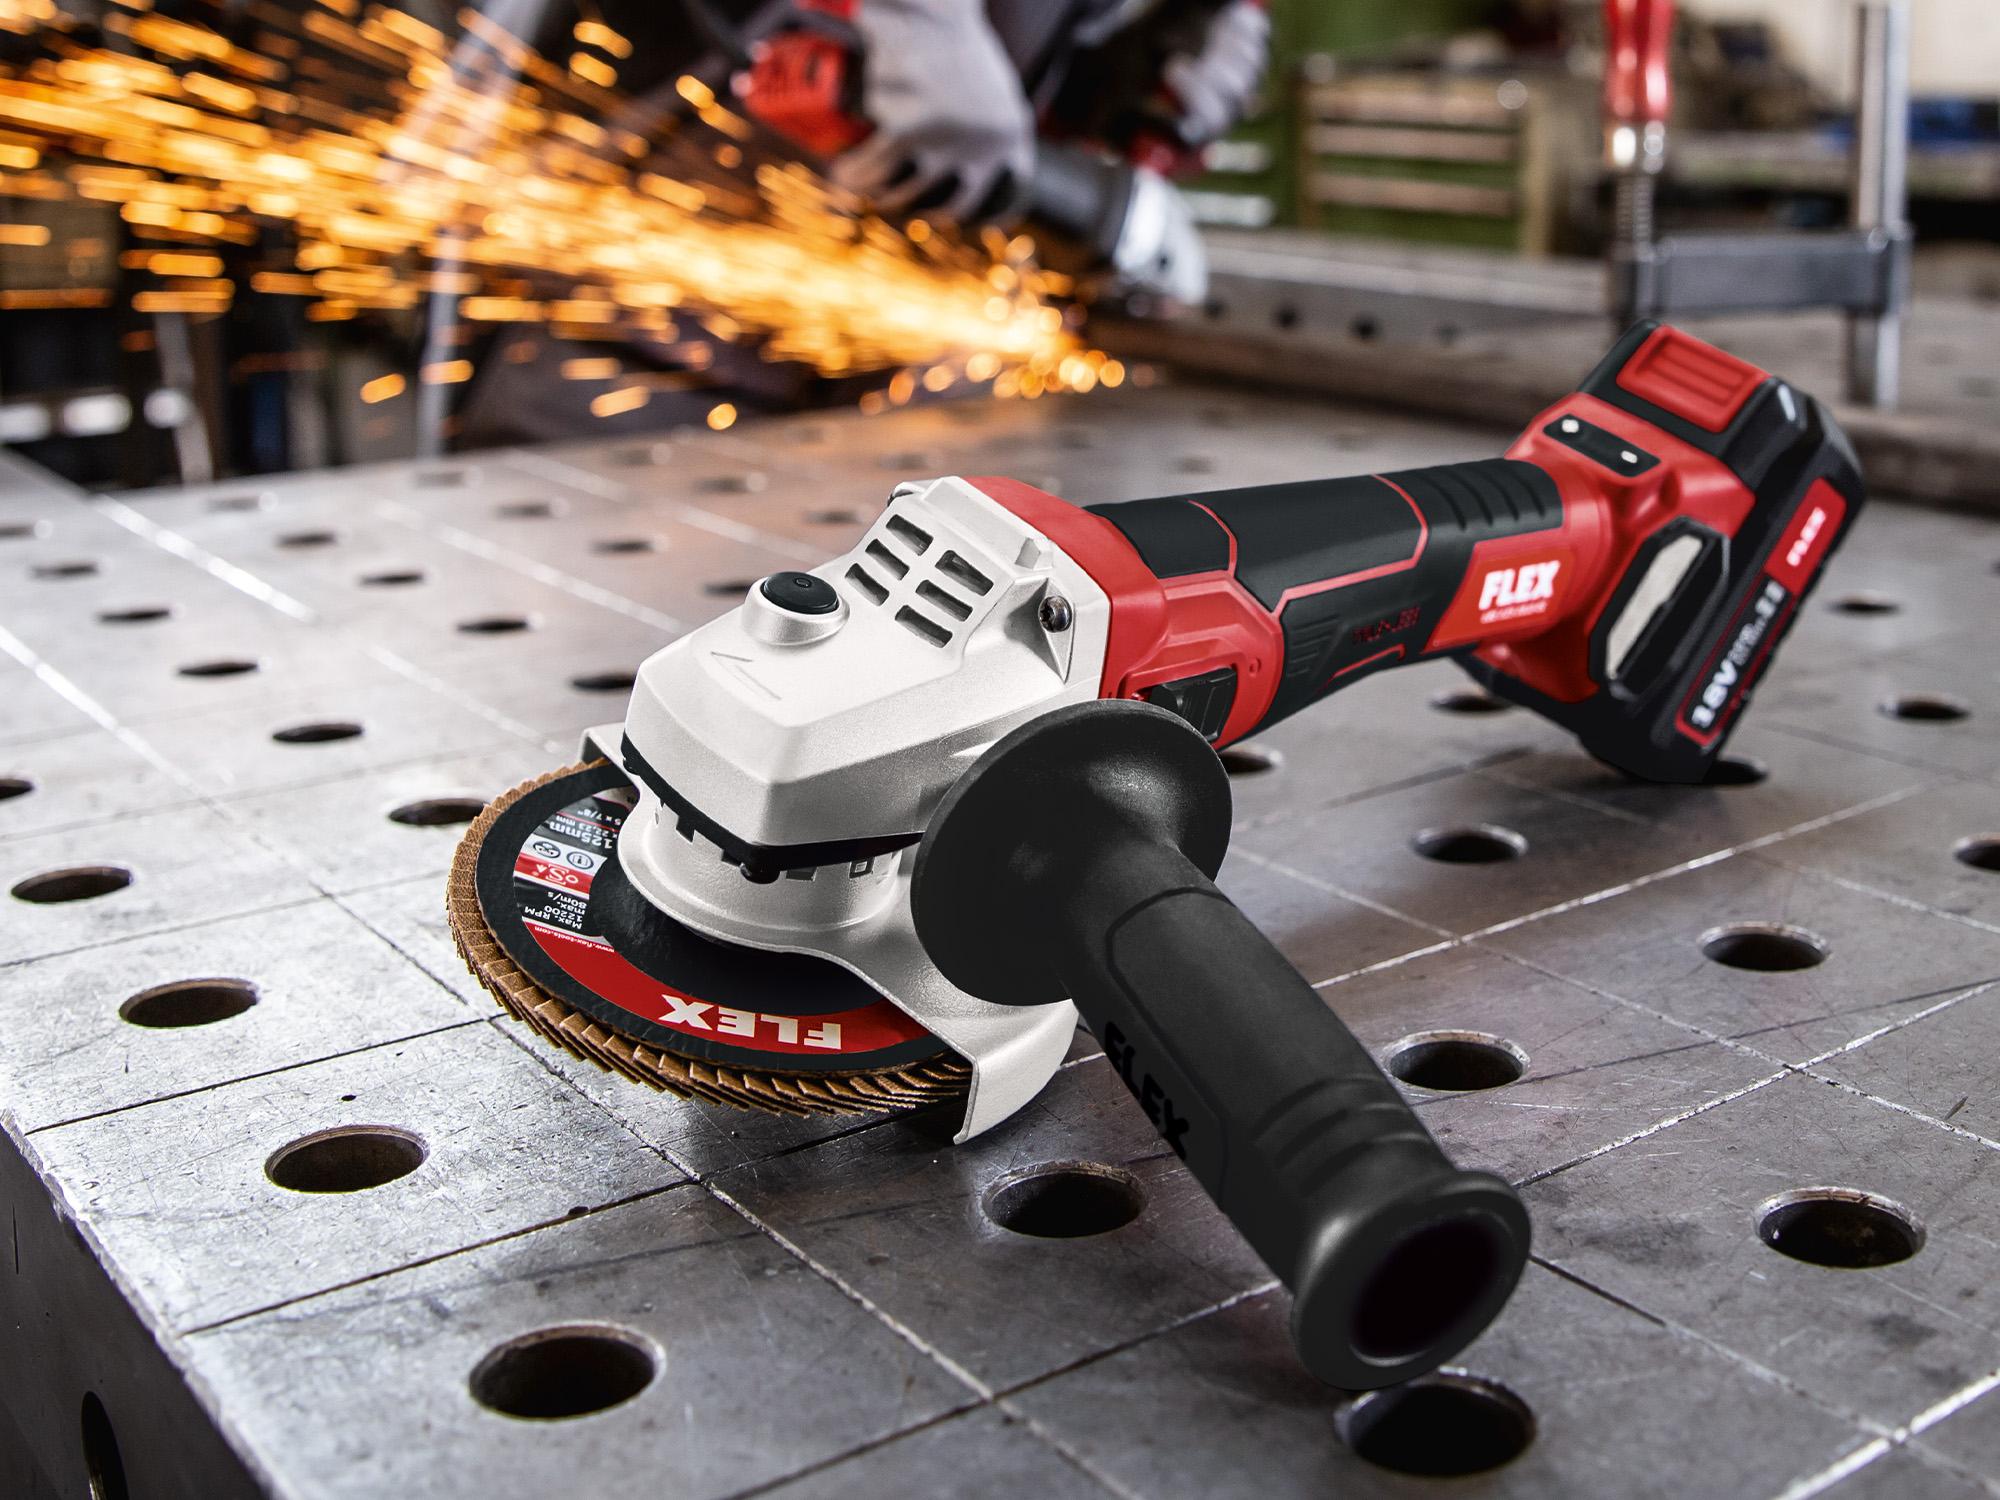 Cordless angle grinder with a brushless motor